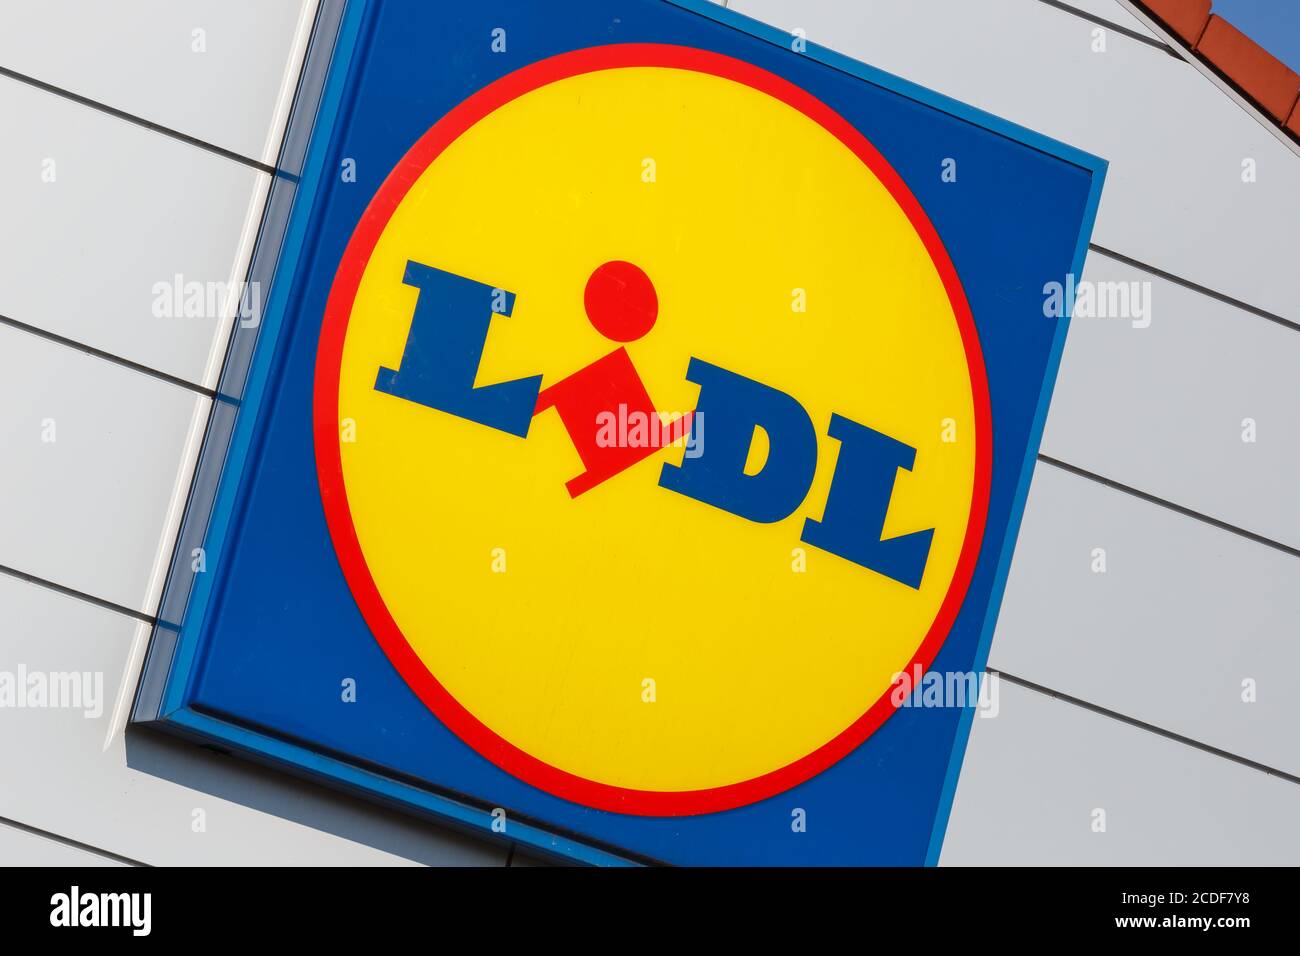 Stuttgart, Germany - May 17, 2020: Lidl branch supermarket discount shop discounter logo sign in Germany. Stock Photo